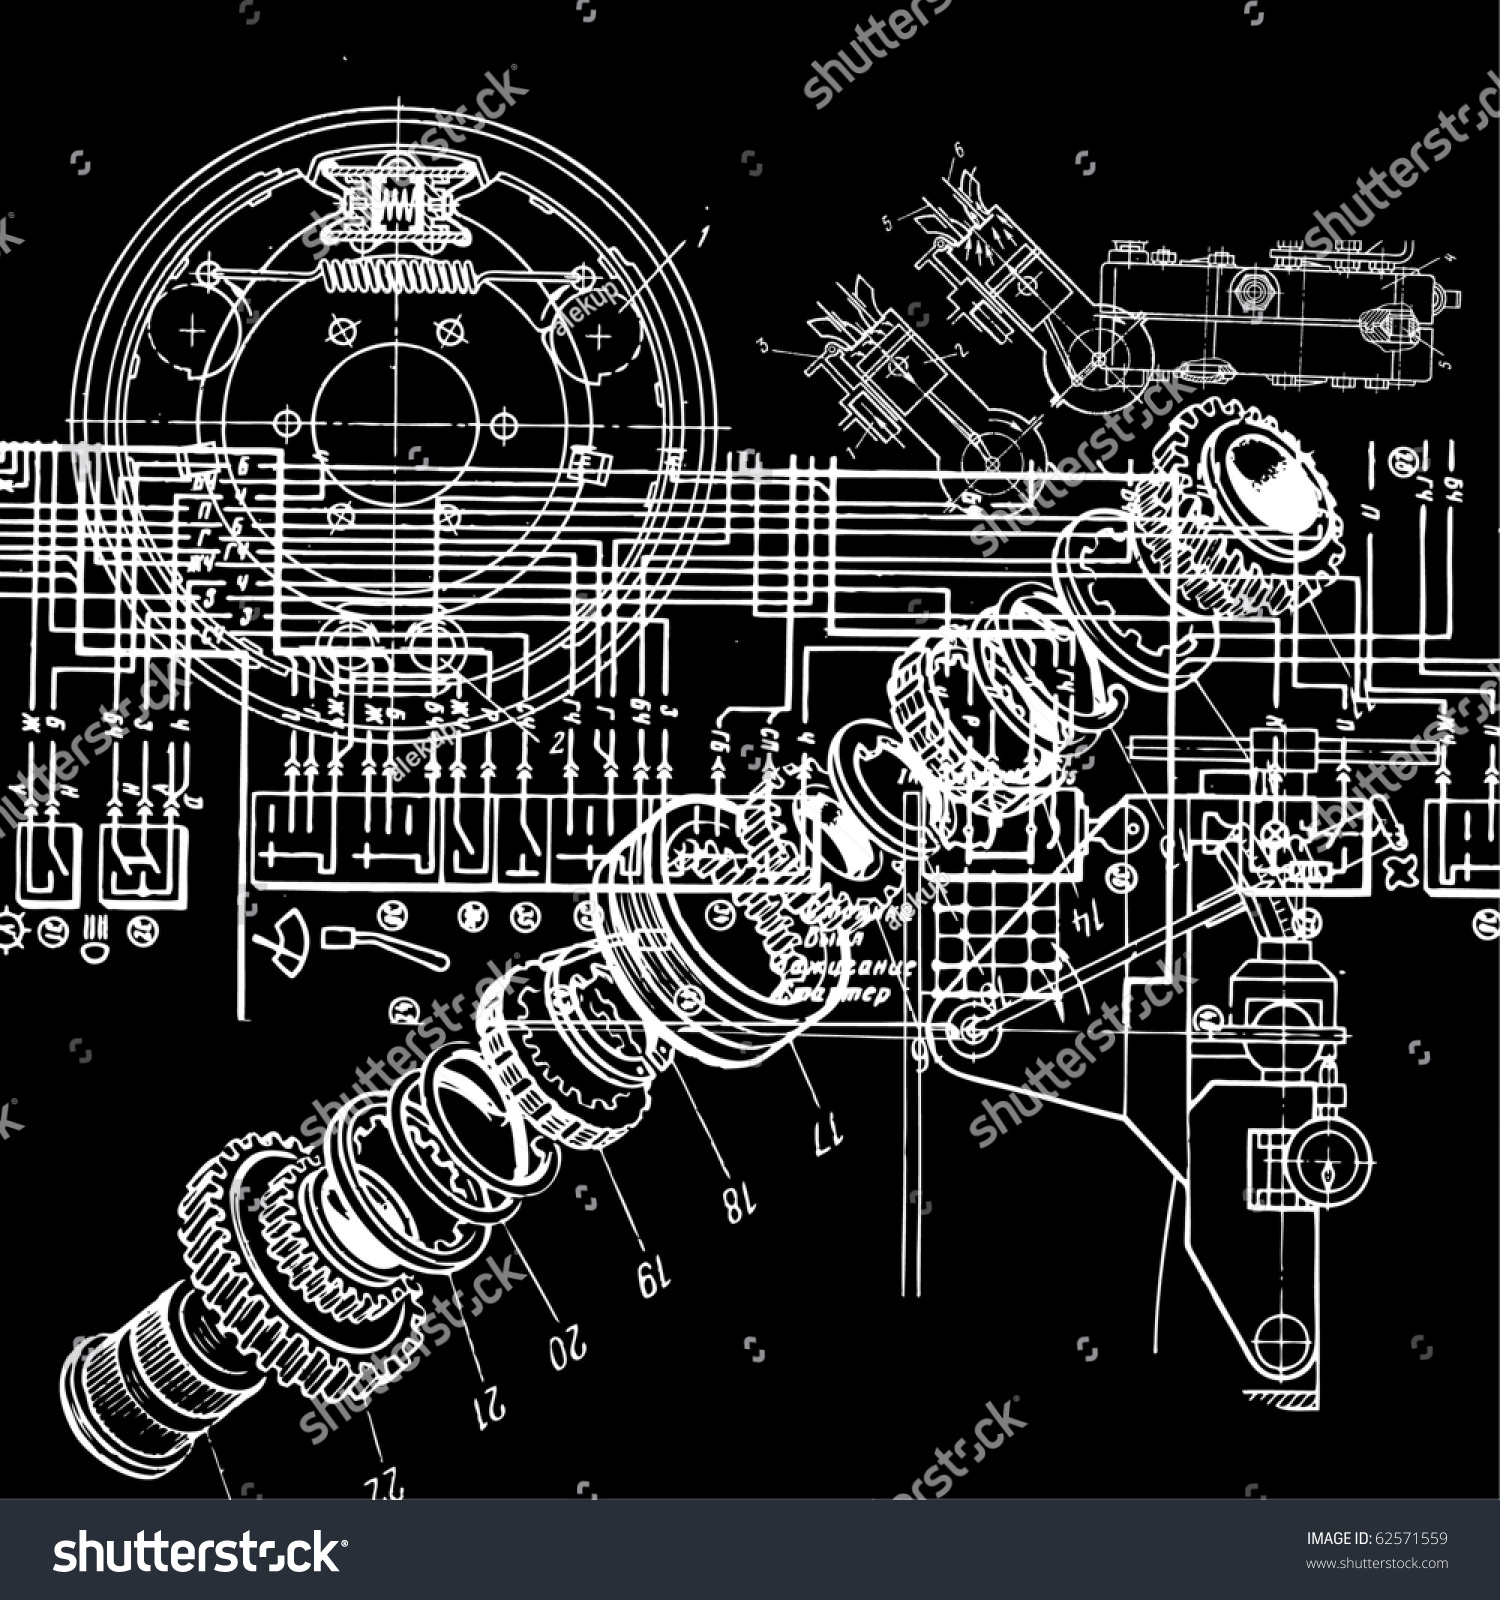 clipart engineering drawings - photo #33